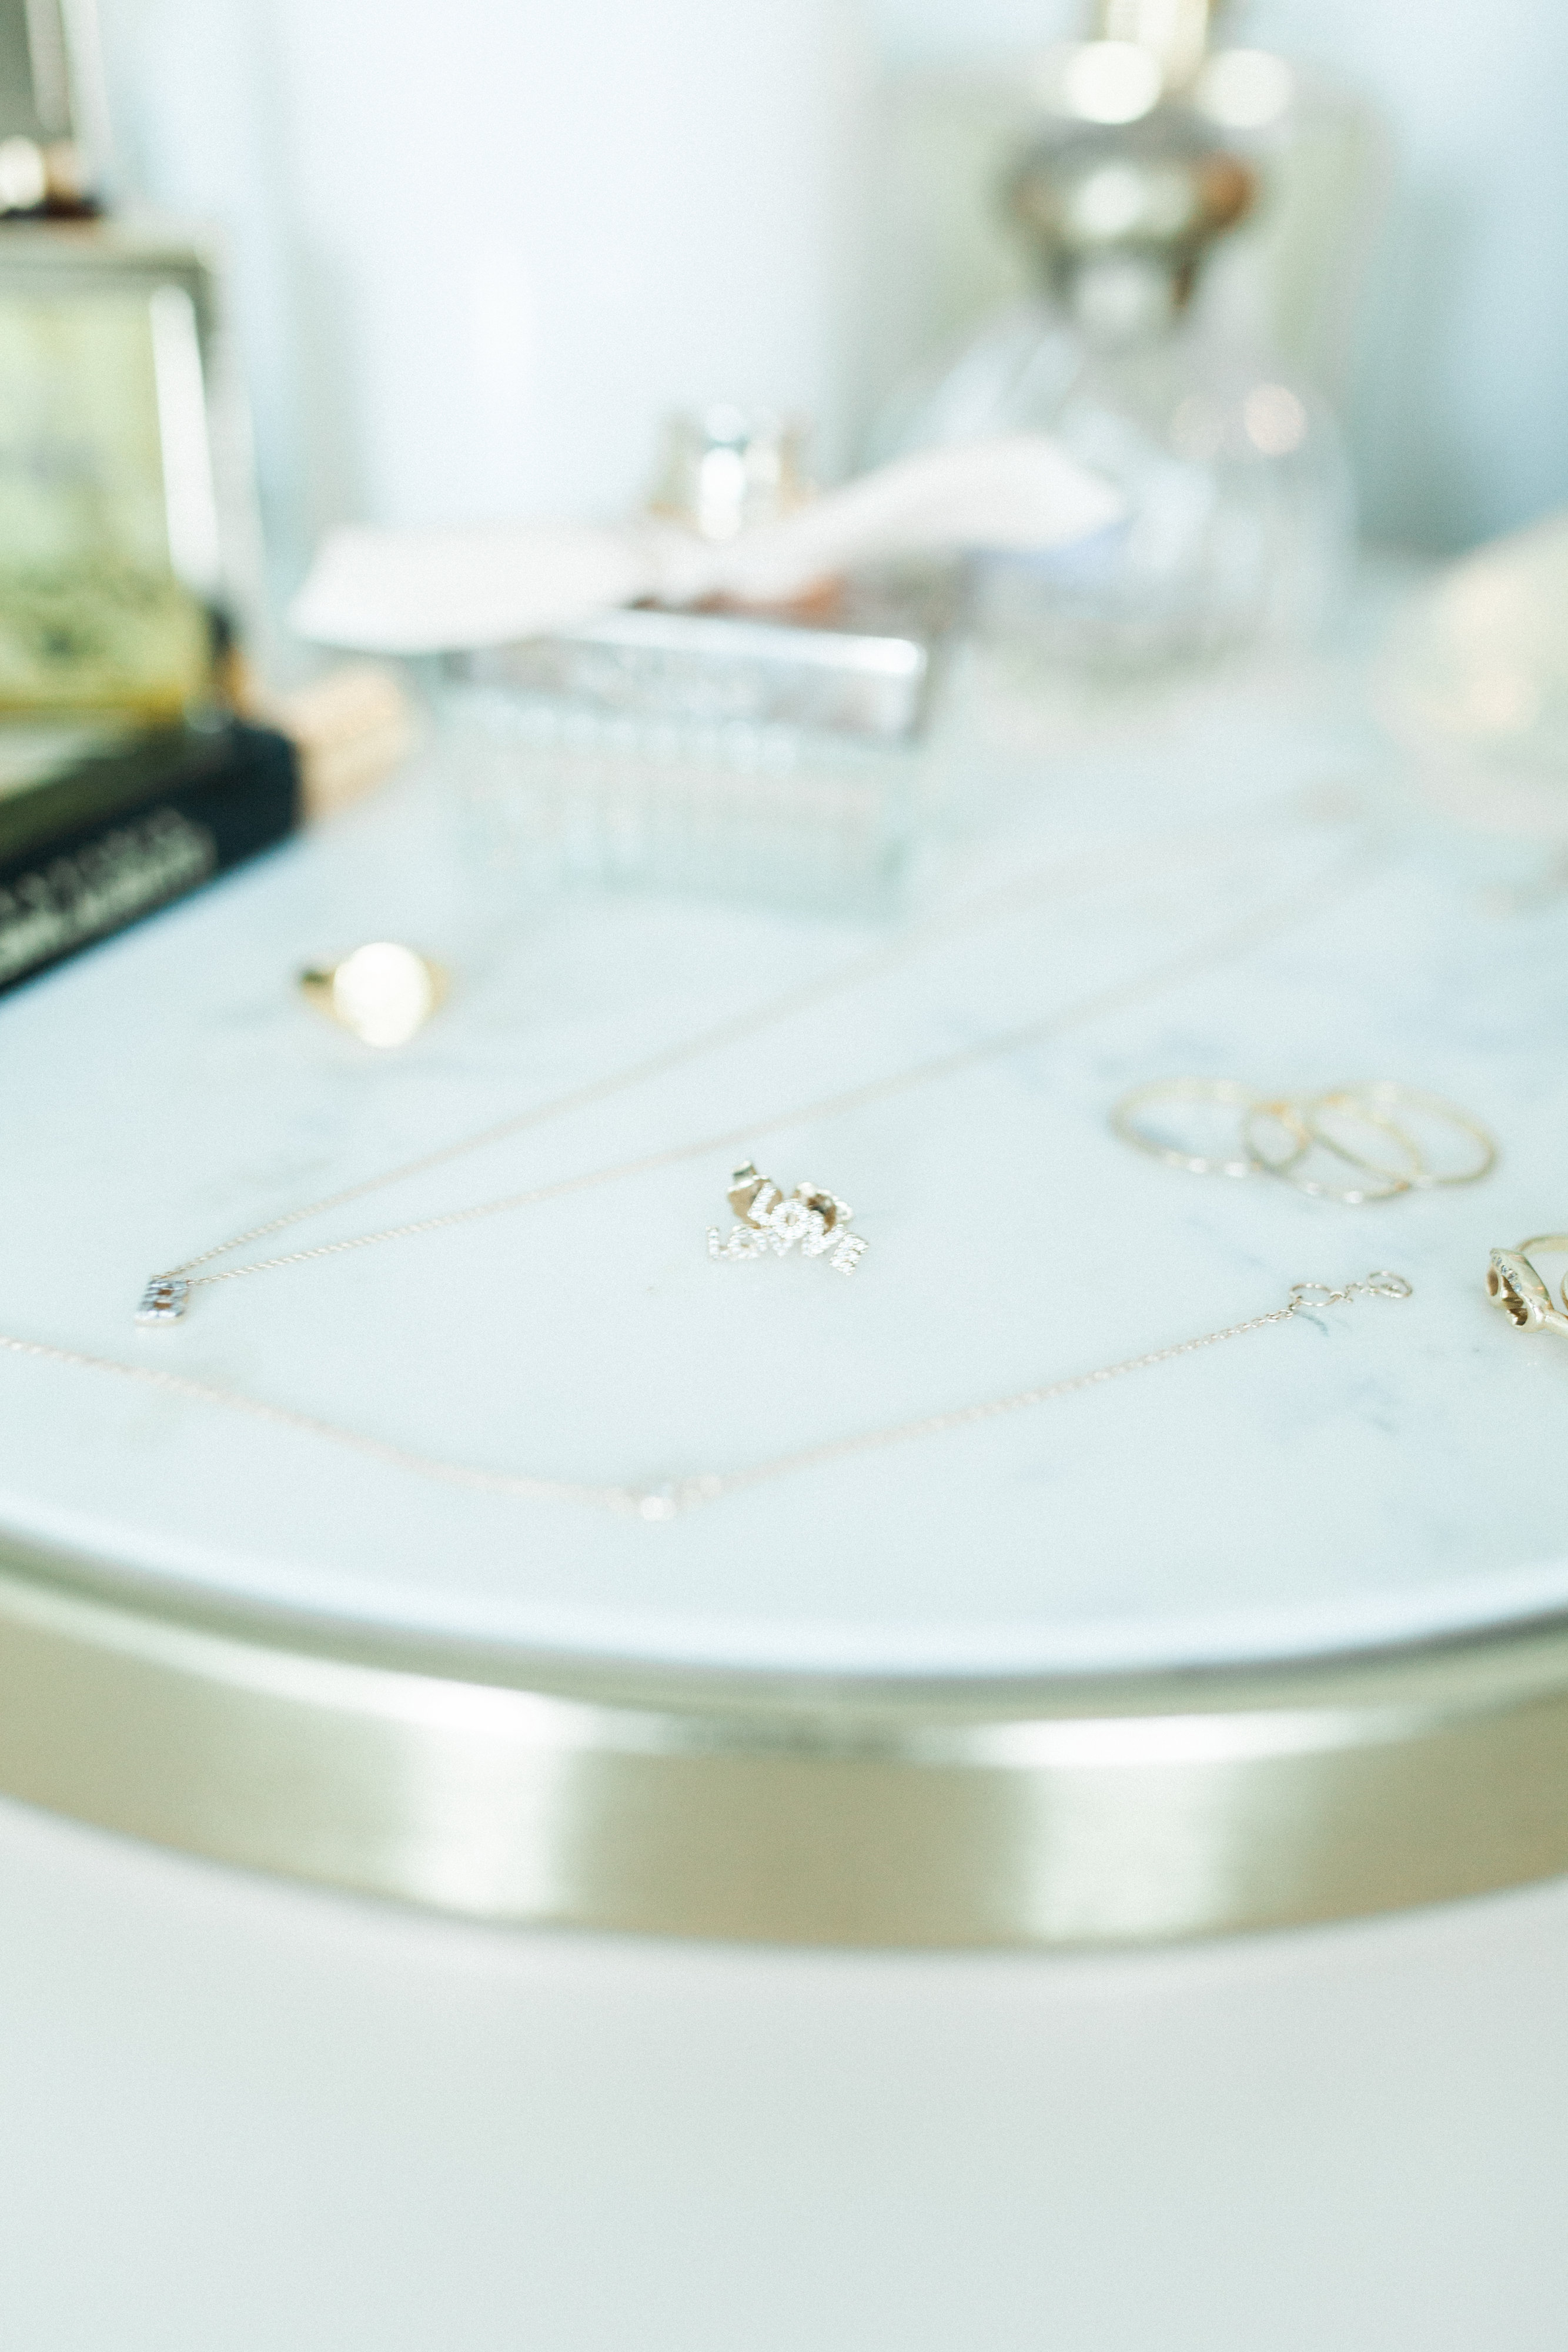 The Best Places to Find Dainty Jewelry